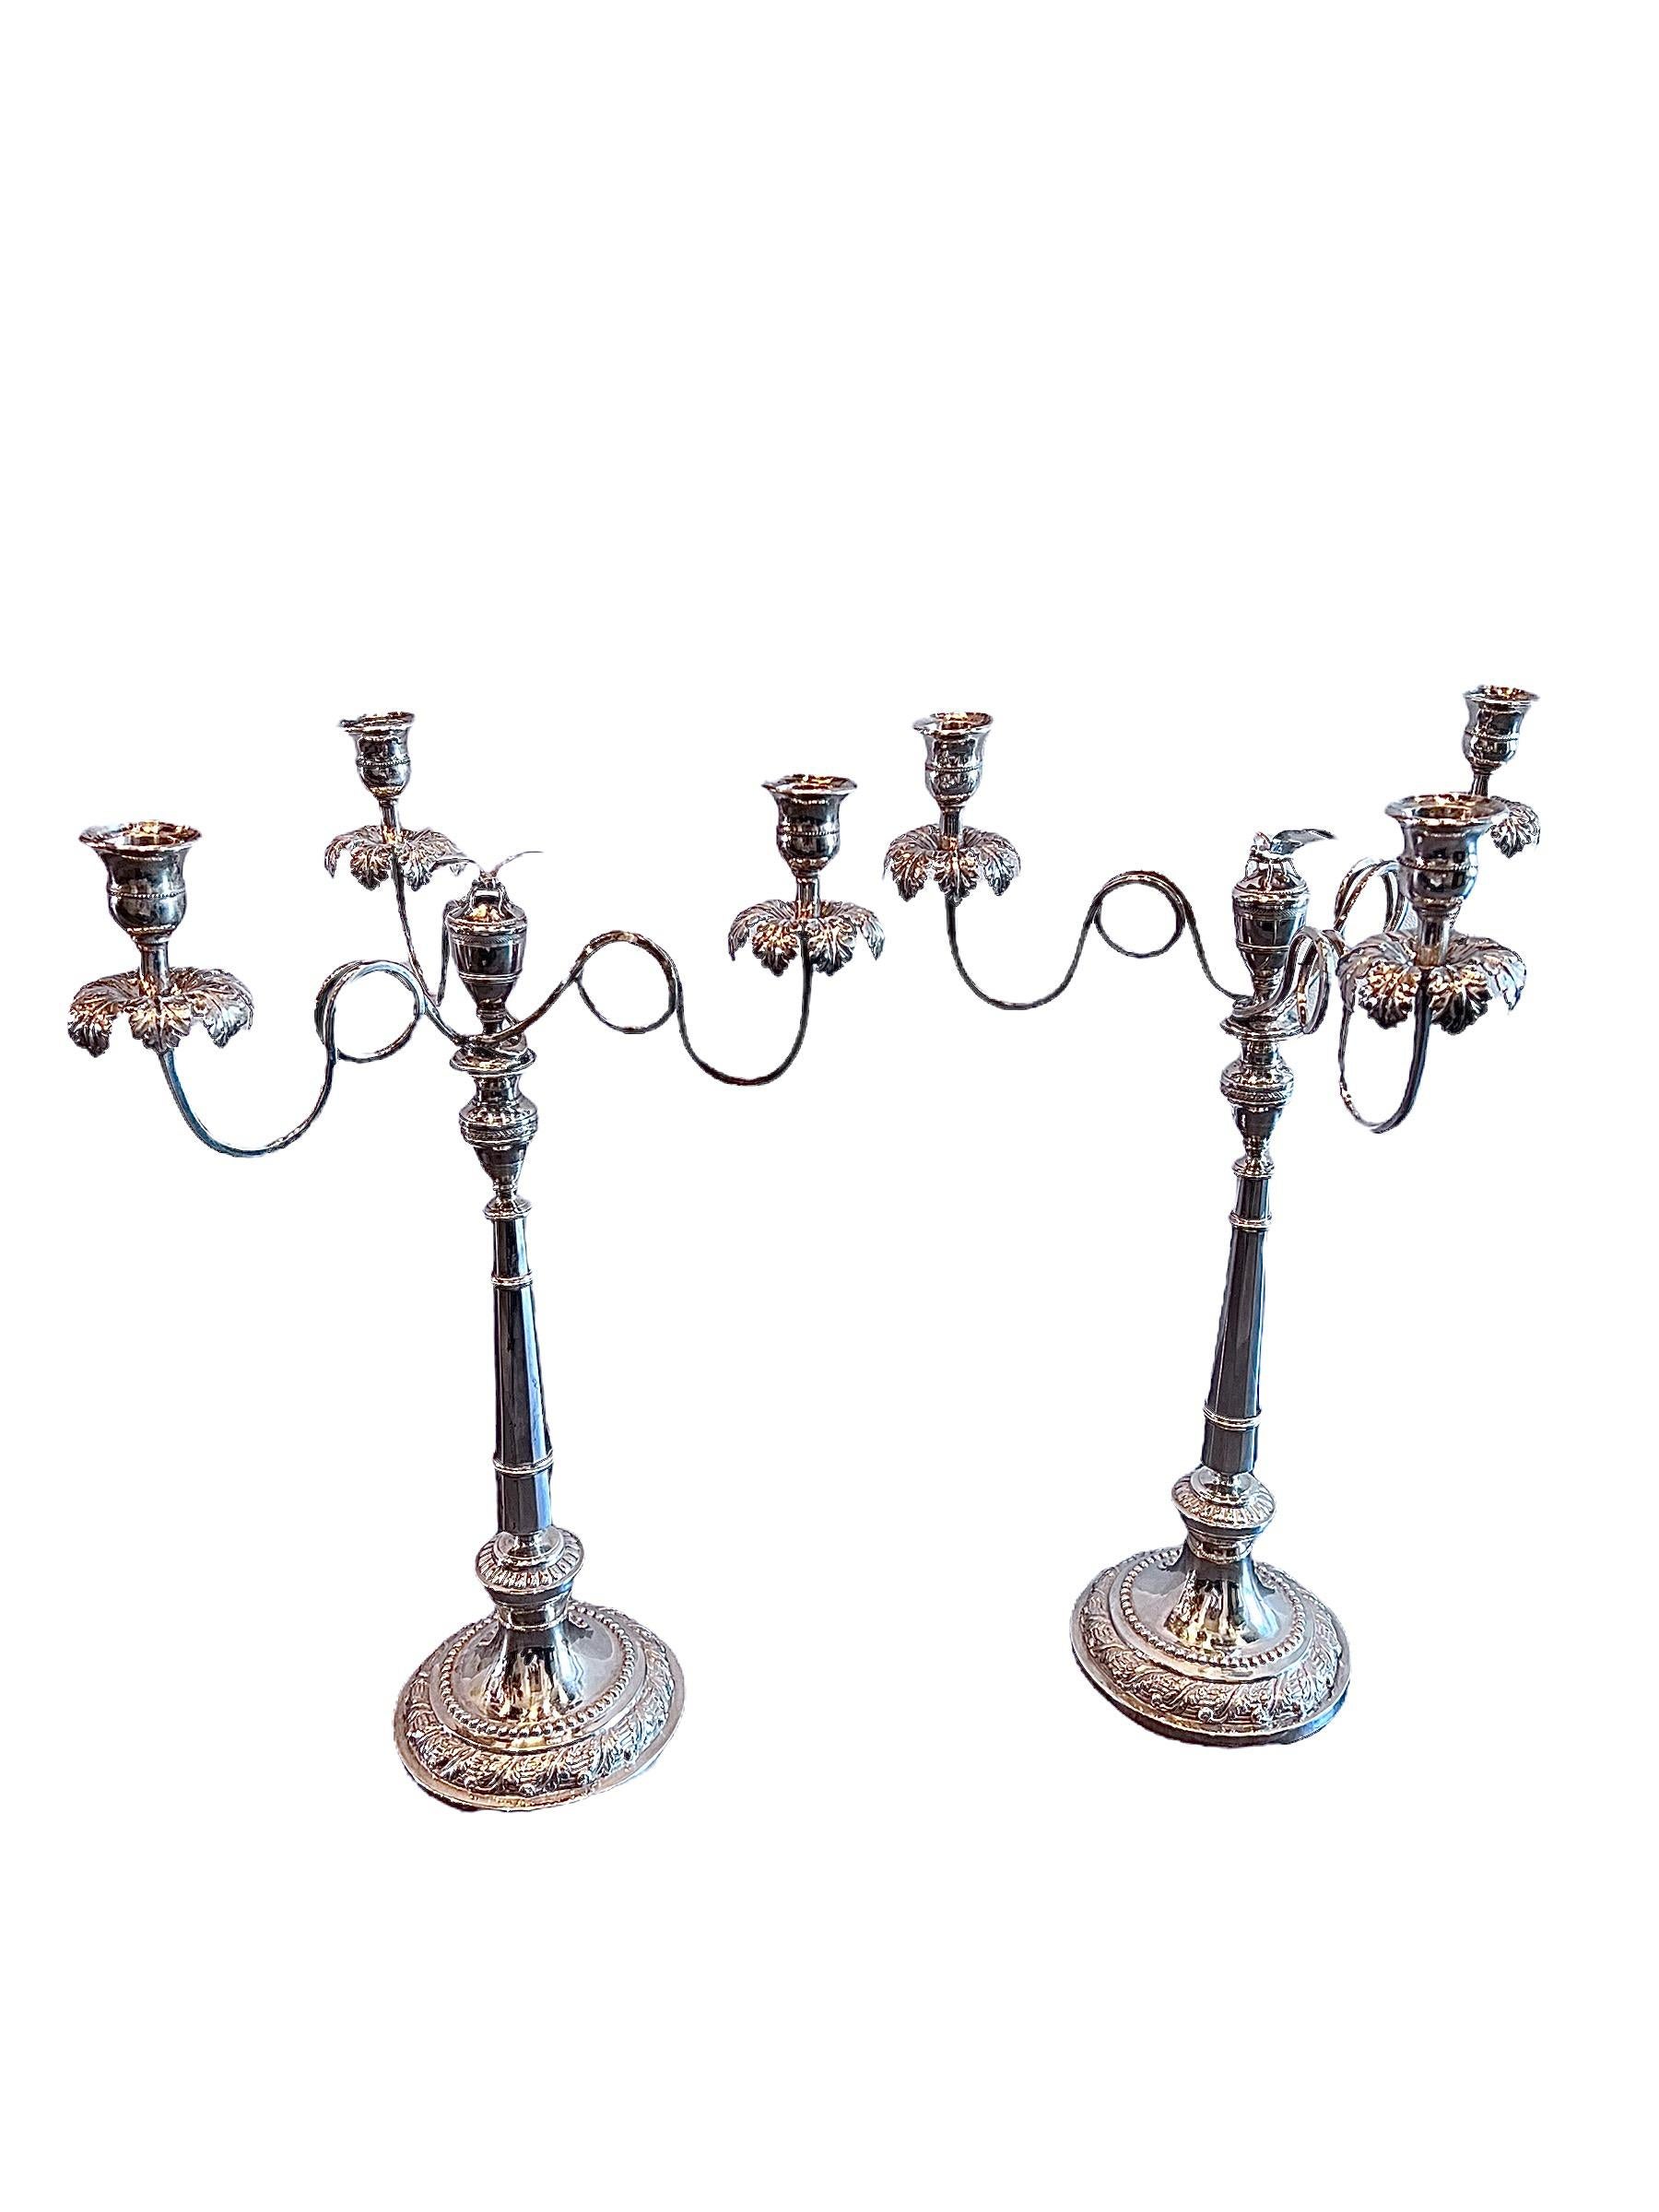 Pair of 1820s Italian Touring Sterling Silver Candelabras In Fair Condition For Sale In North Miami, FL